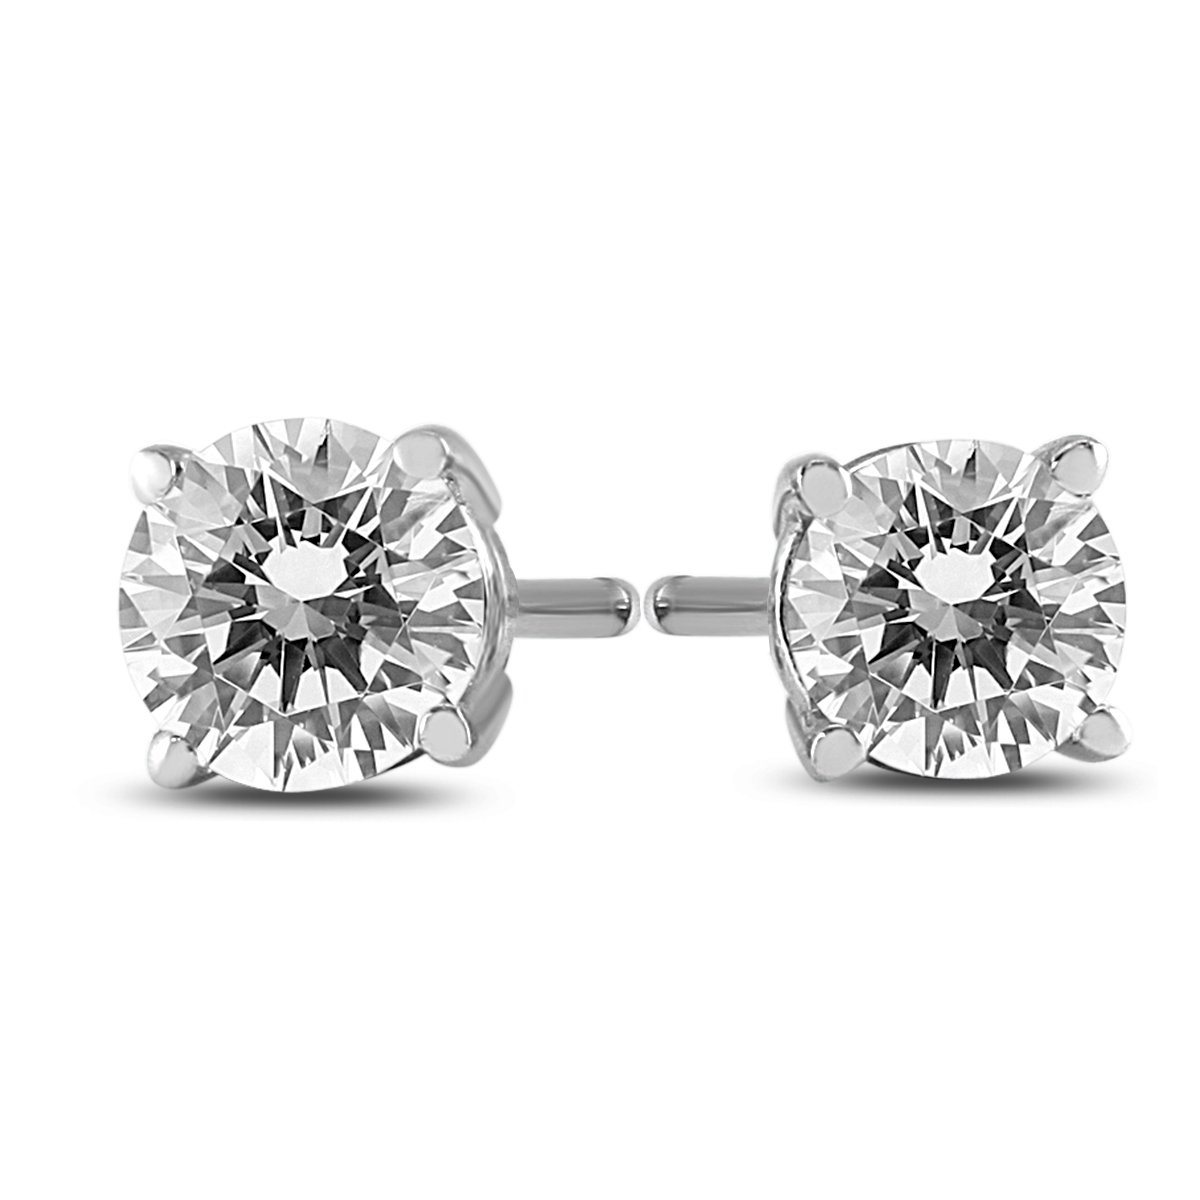 1/3 Carat TW AGS Certified Round Diamond Solitaire Stud Earrings in 14K White Gold (I-J Color, SI1-SI2 Clarity)